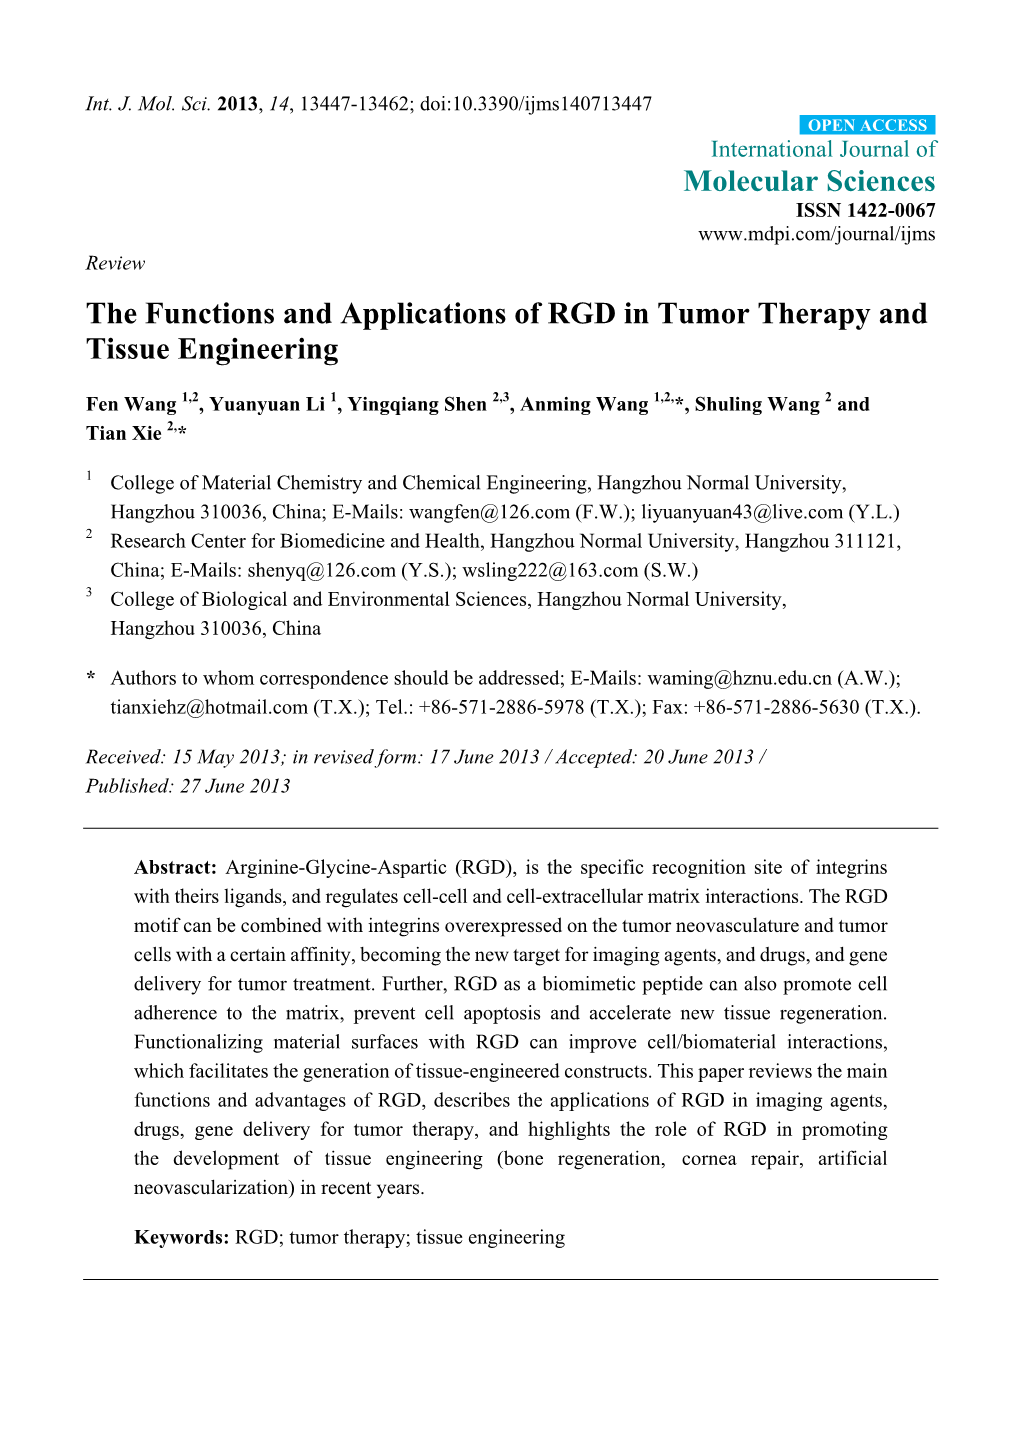 The Functions and Applications of RGD in Tumor Therapy and Tissue Engineering